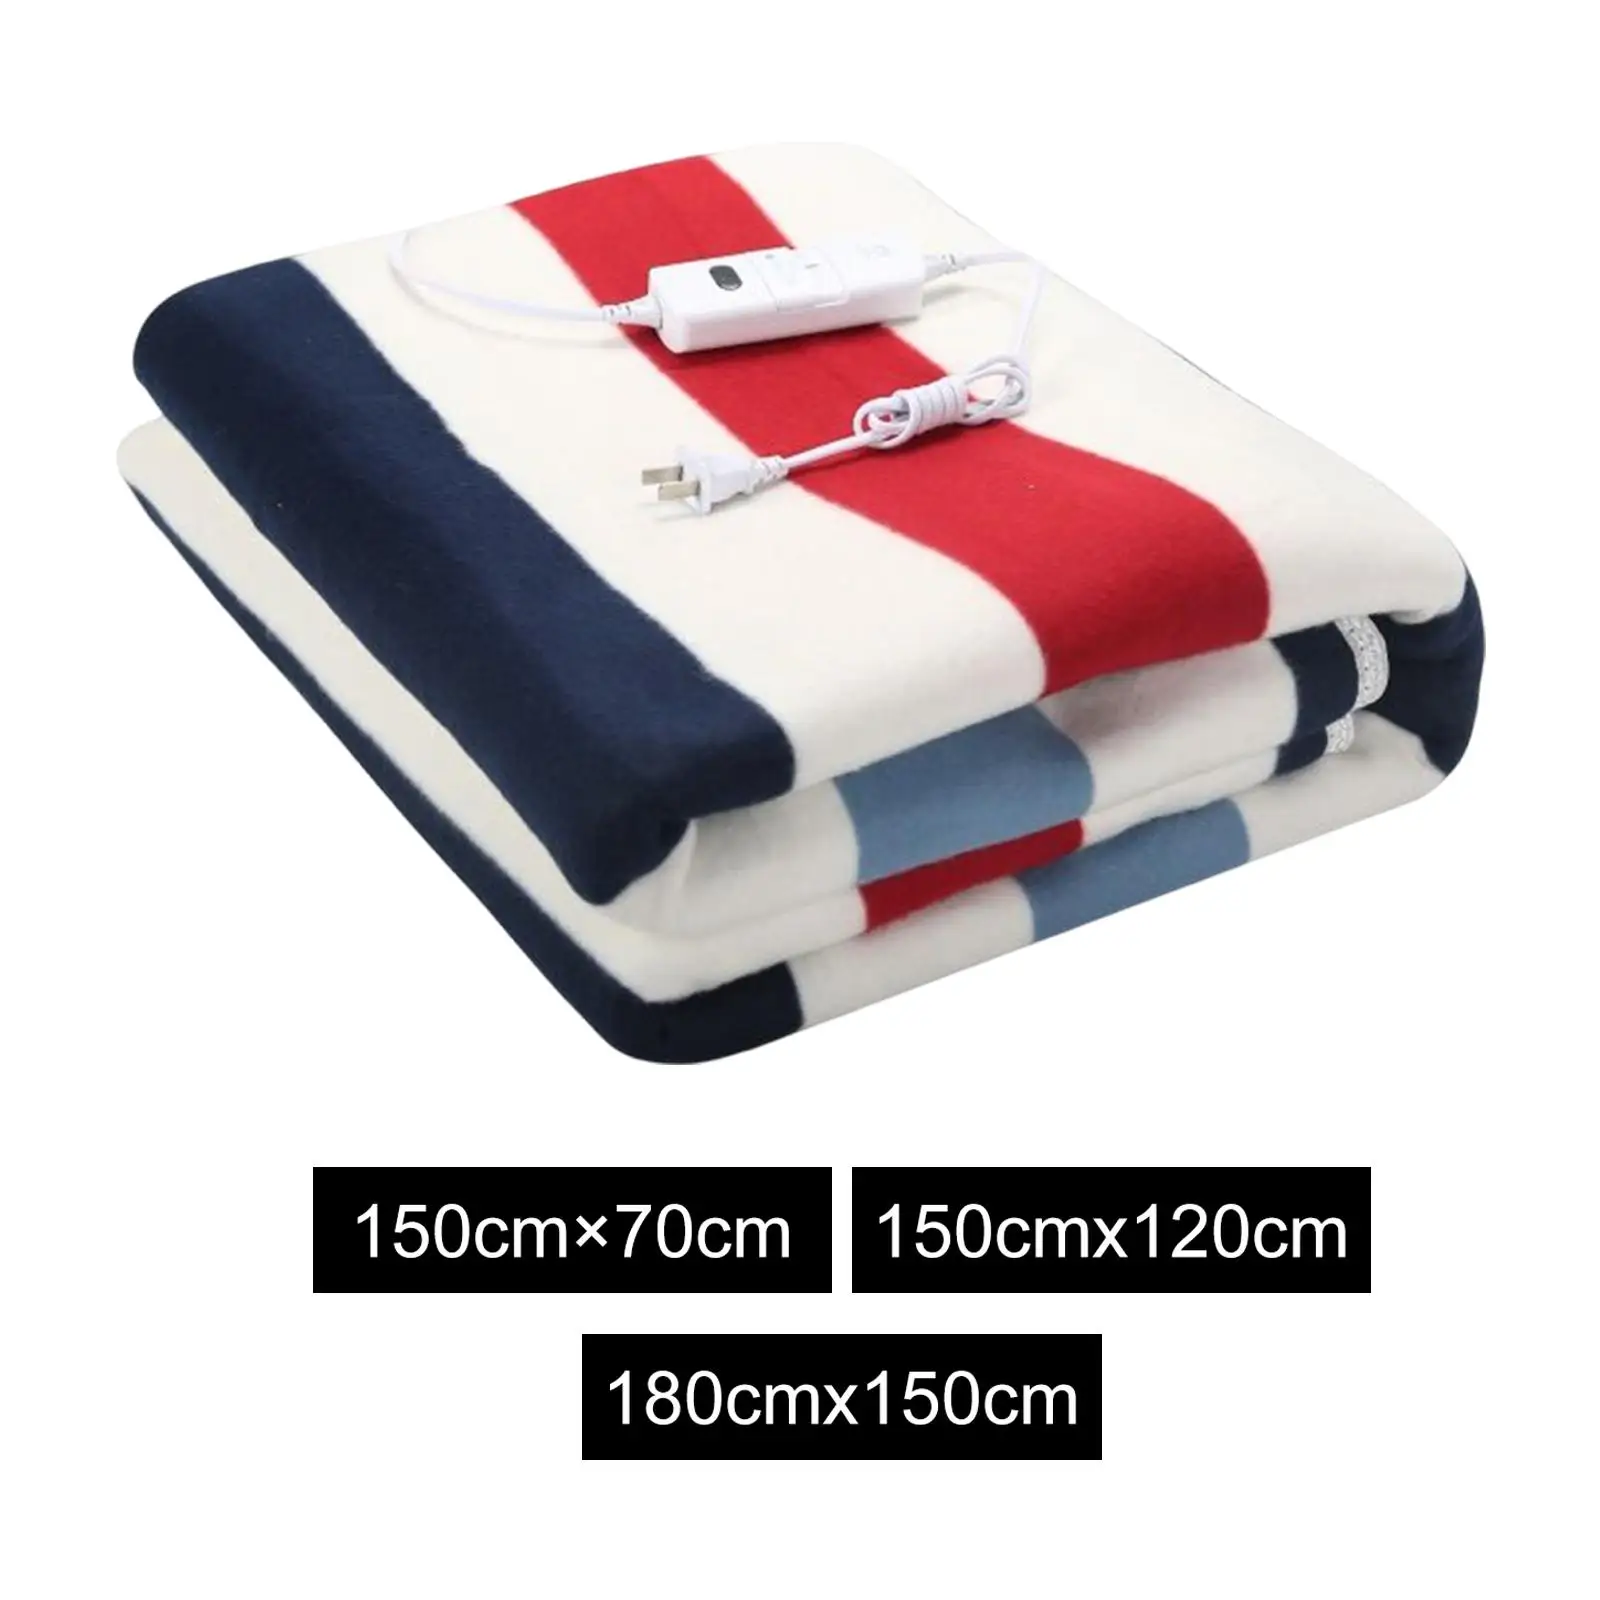 Heated Blanket Mattress Thermostat Winter Body Warmer for Bed Home Office